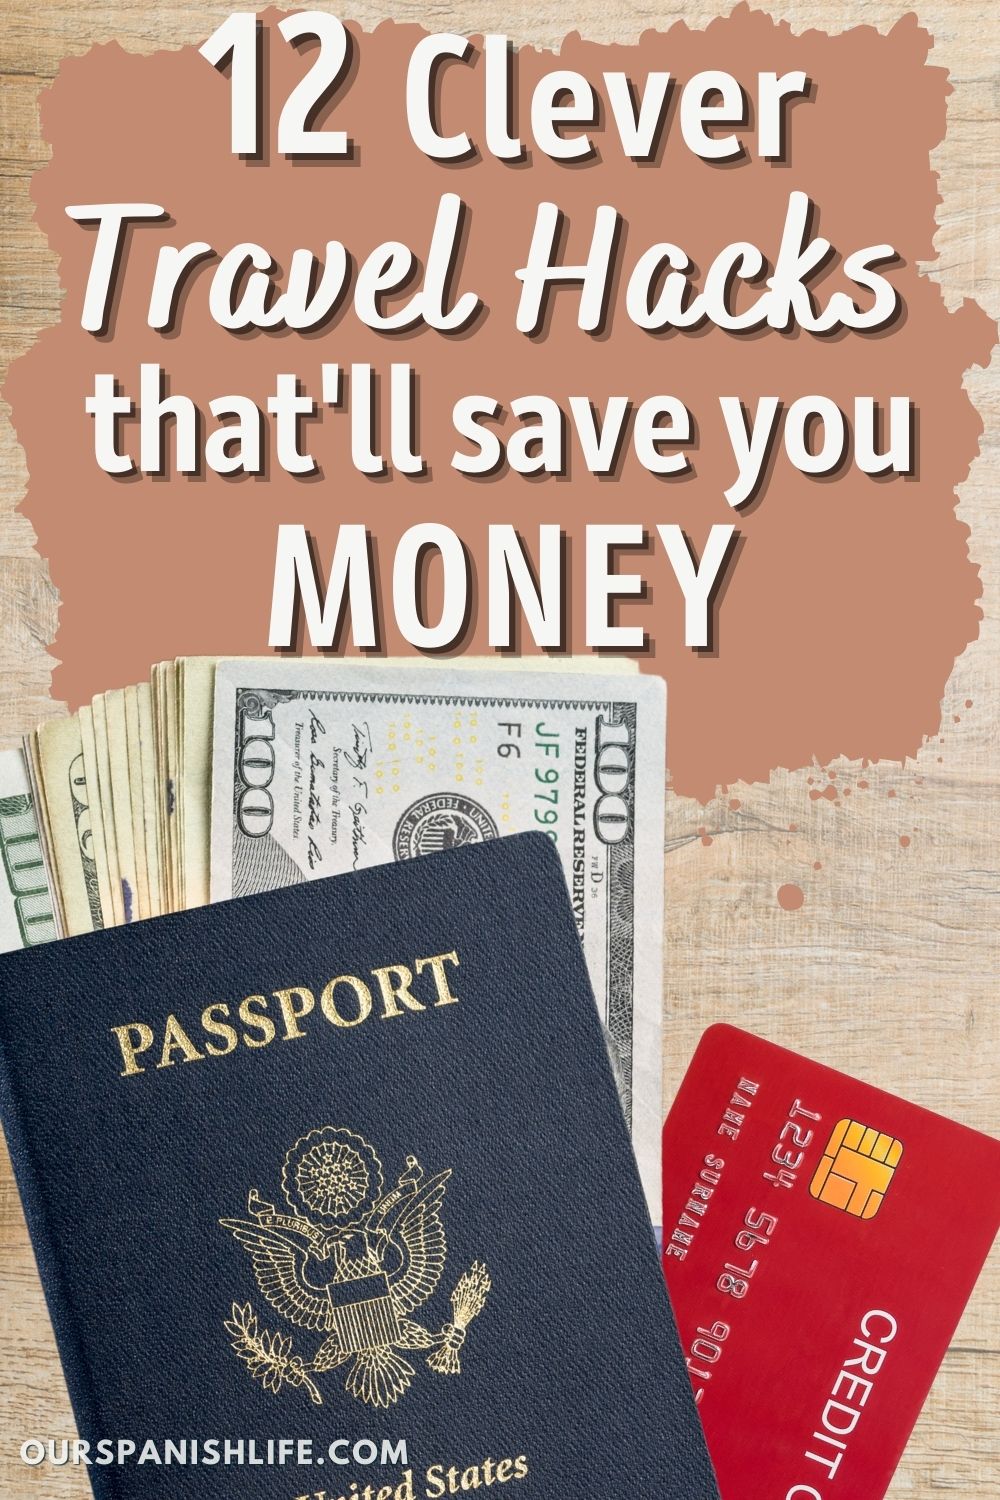 Image showong a passport , some money and a credit card with text overlay that reads 12 Clever travel hacks that'll save you money